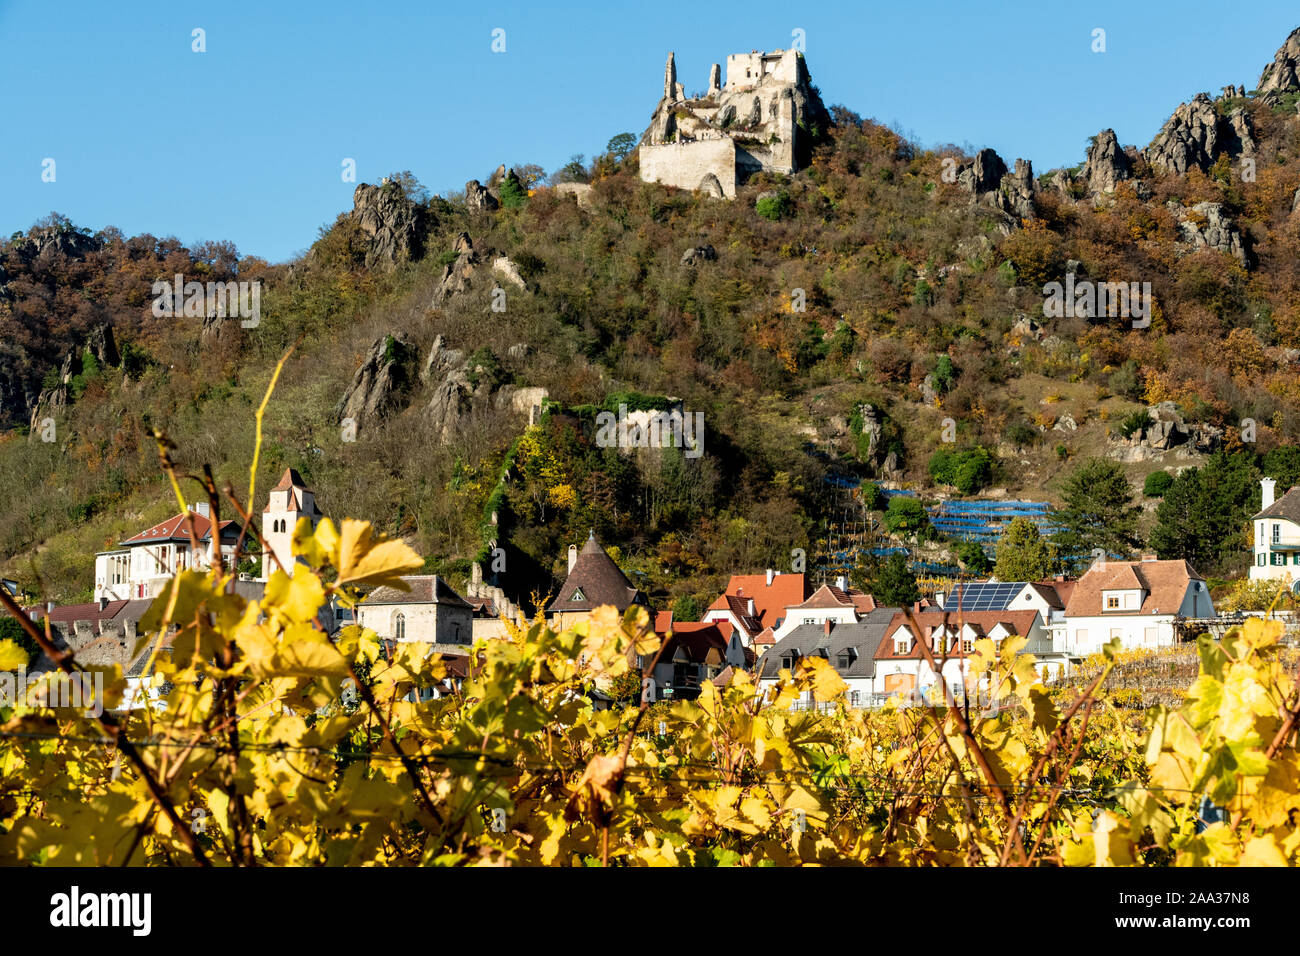 Durnstein town with the vineyard in the foreground and Durnstein castle on top of the hill Stock Photo